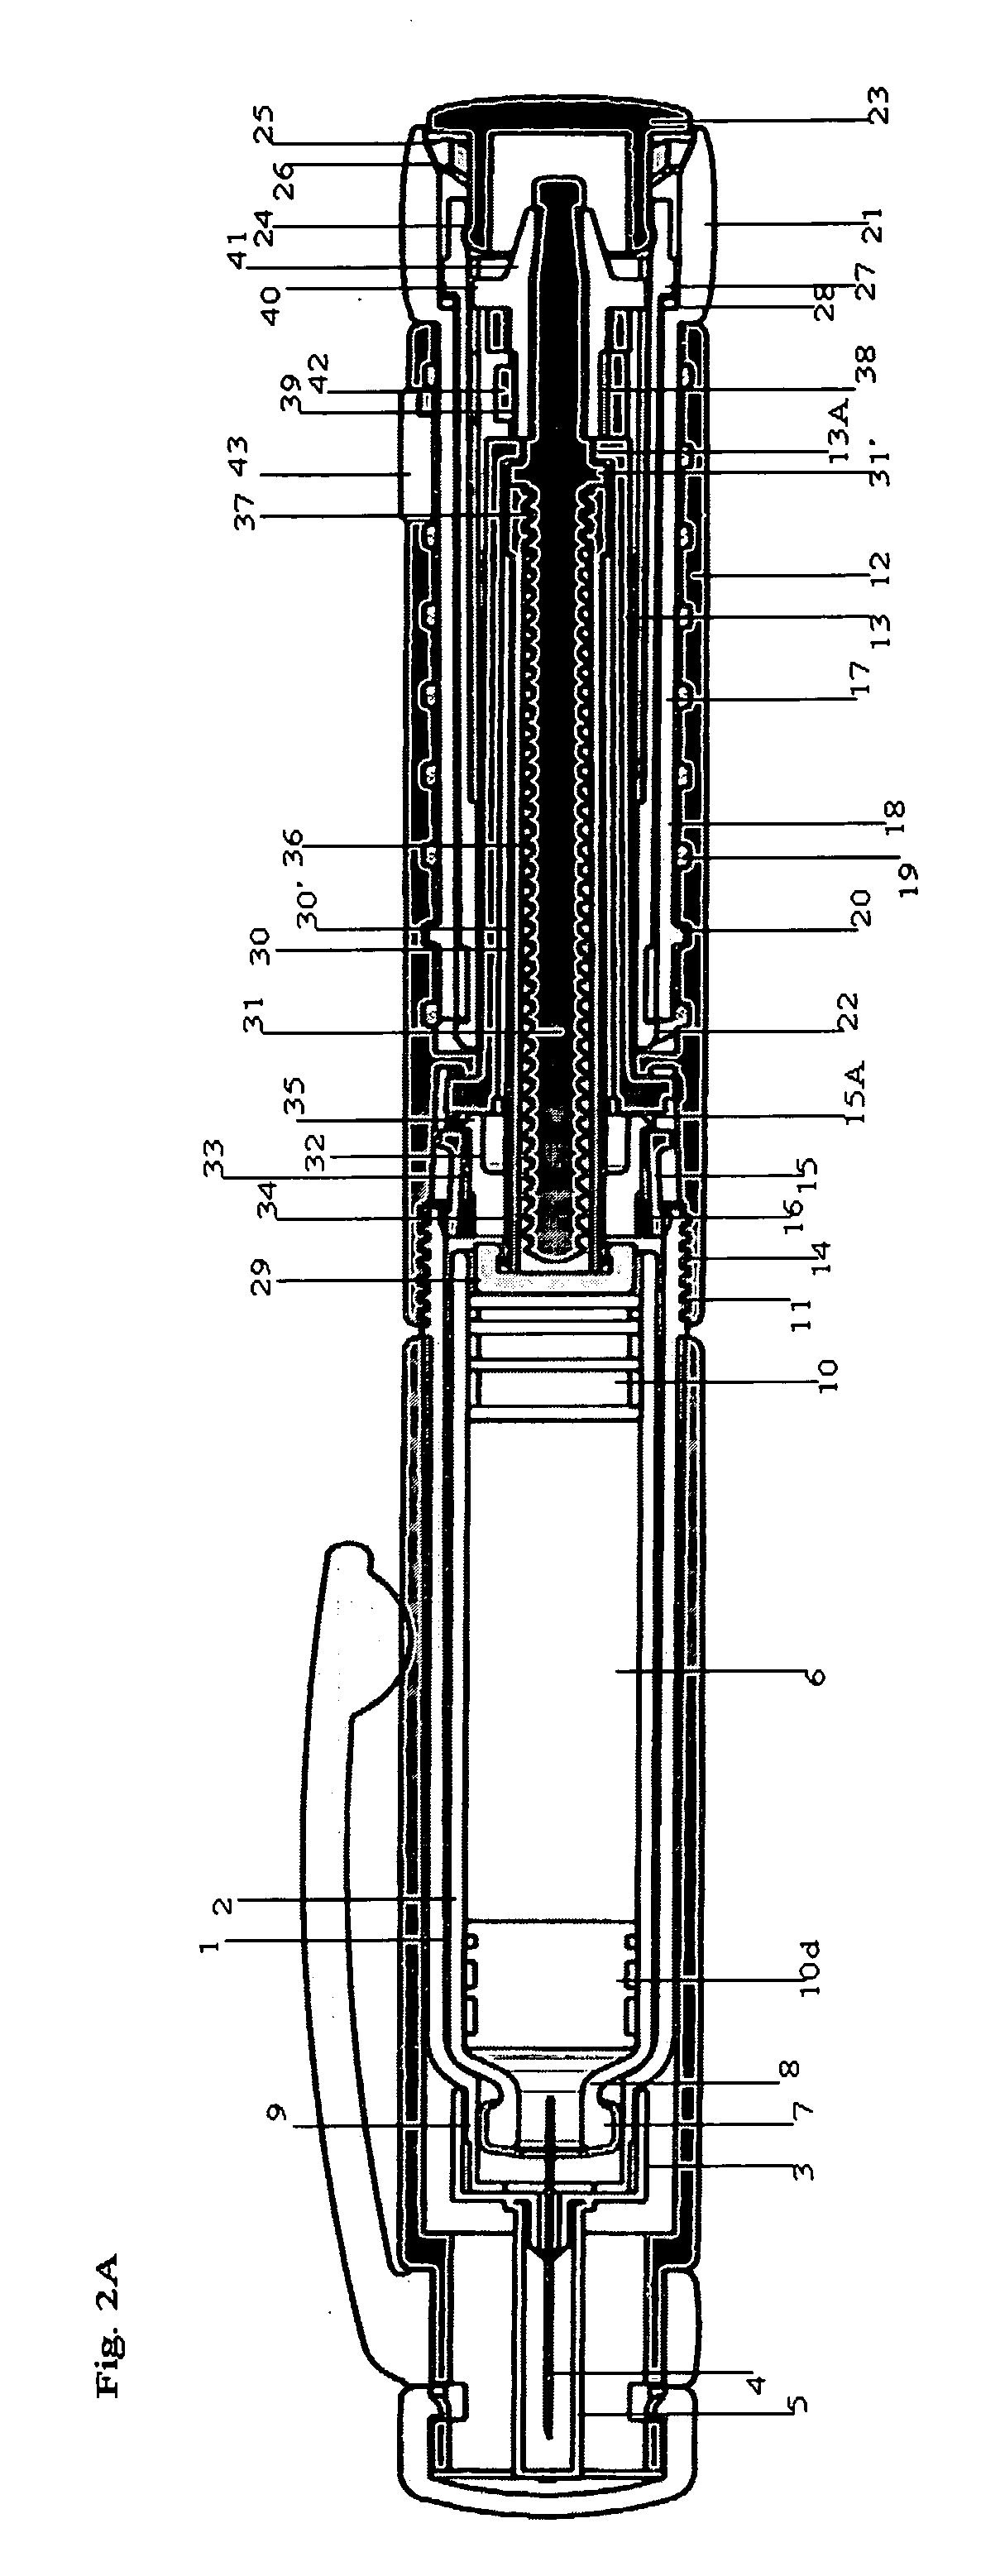 Pen shaped medication injection devices